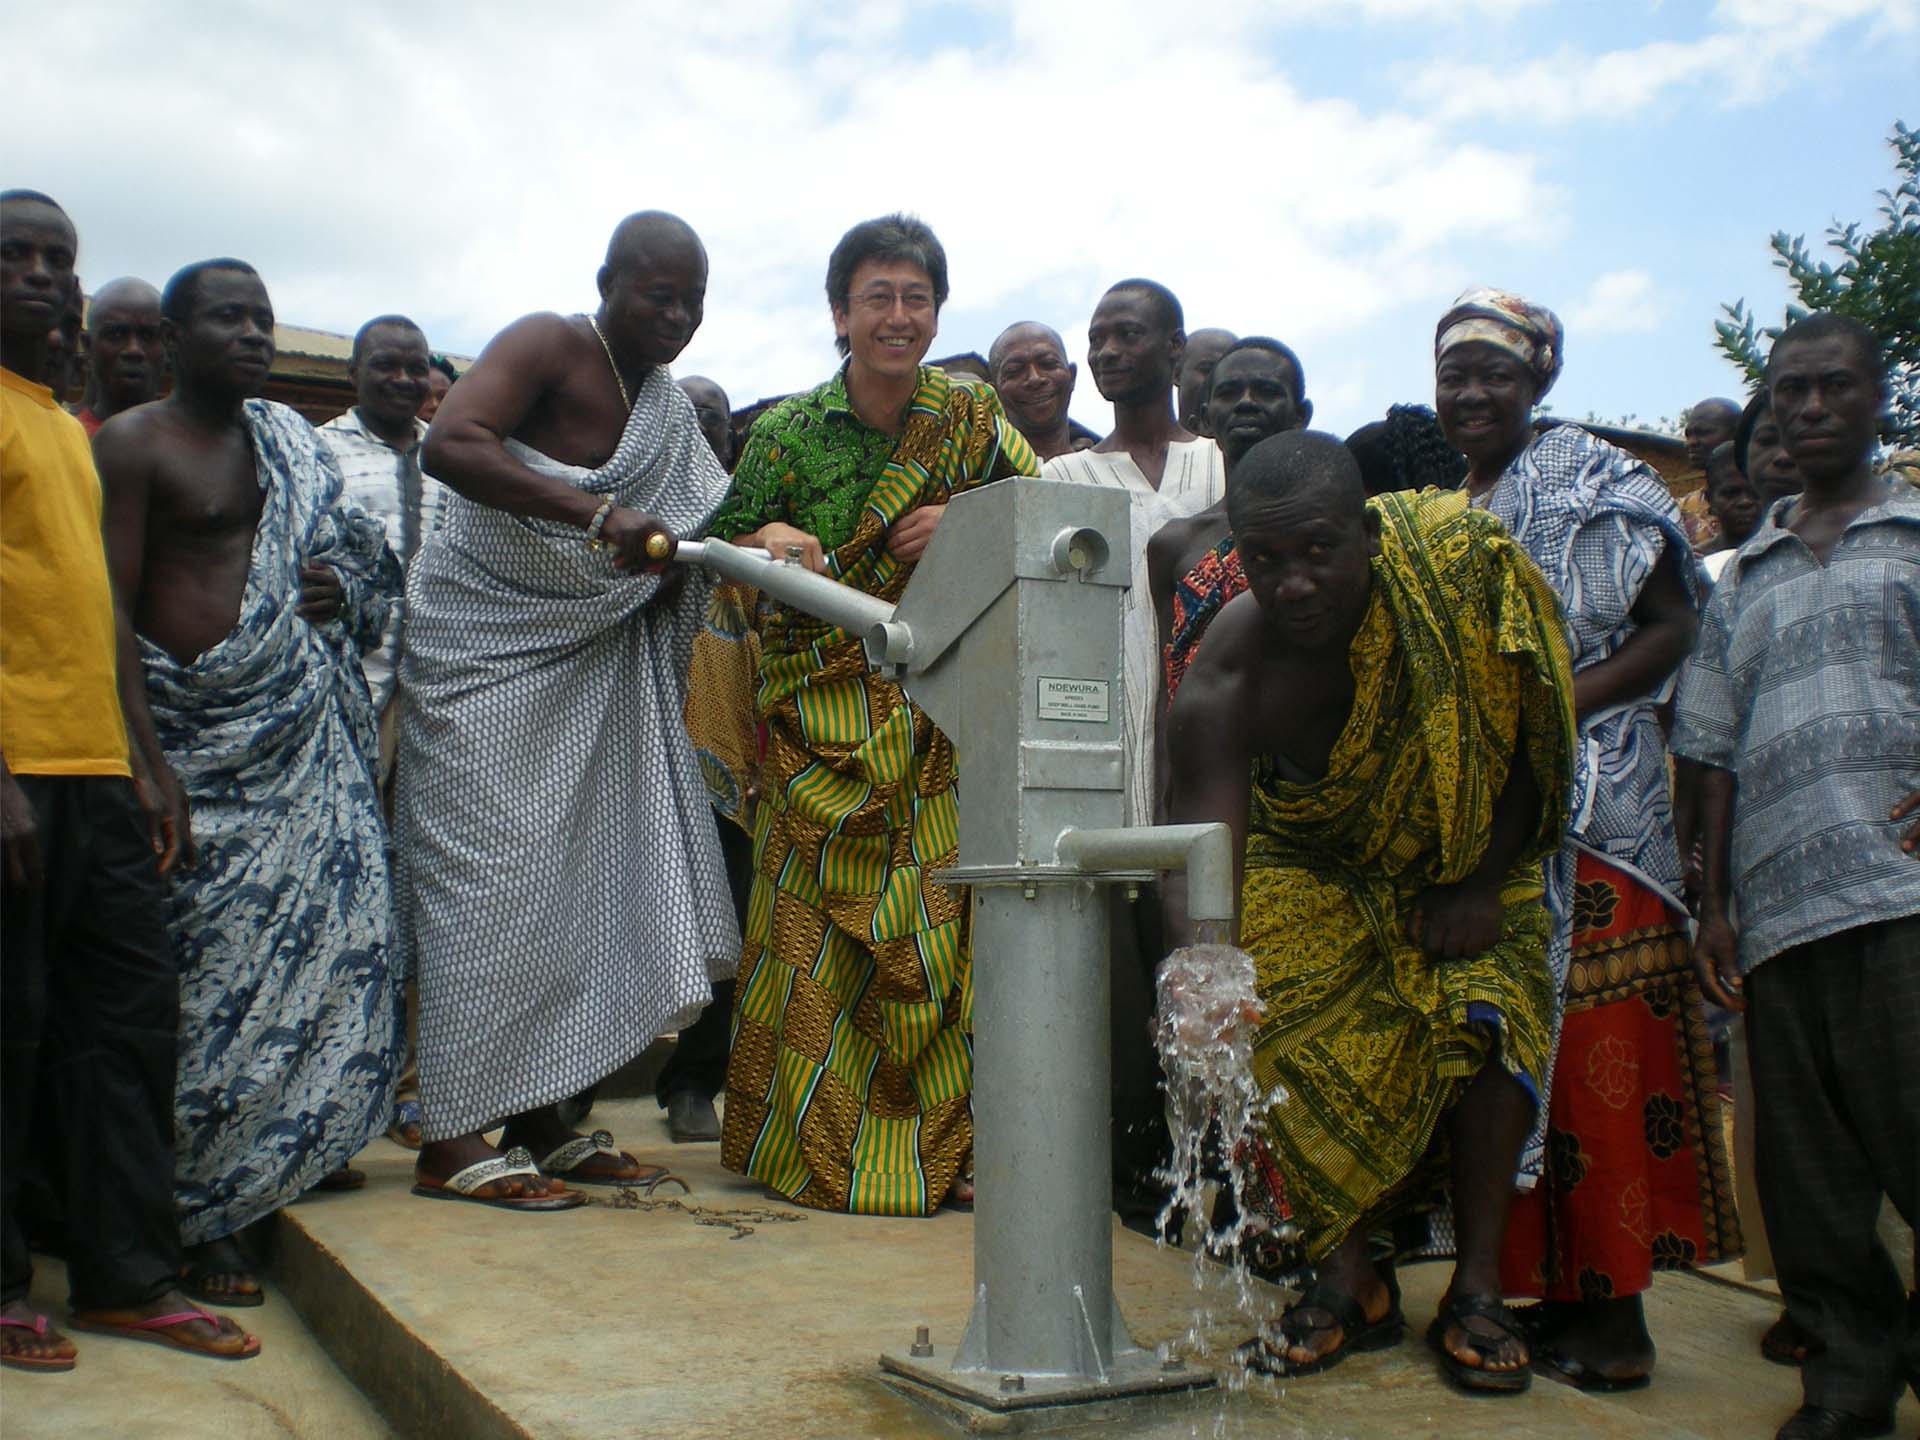 Photo: Meiji helped build wells to ensure a supply of safe, drinkable water